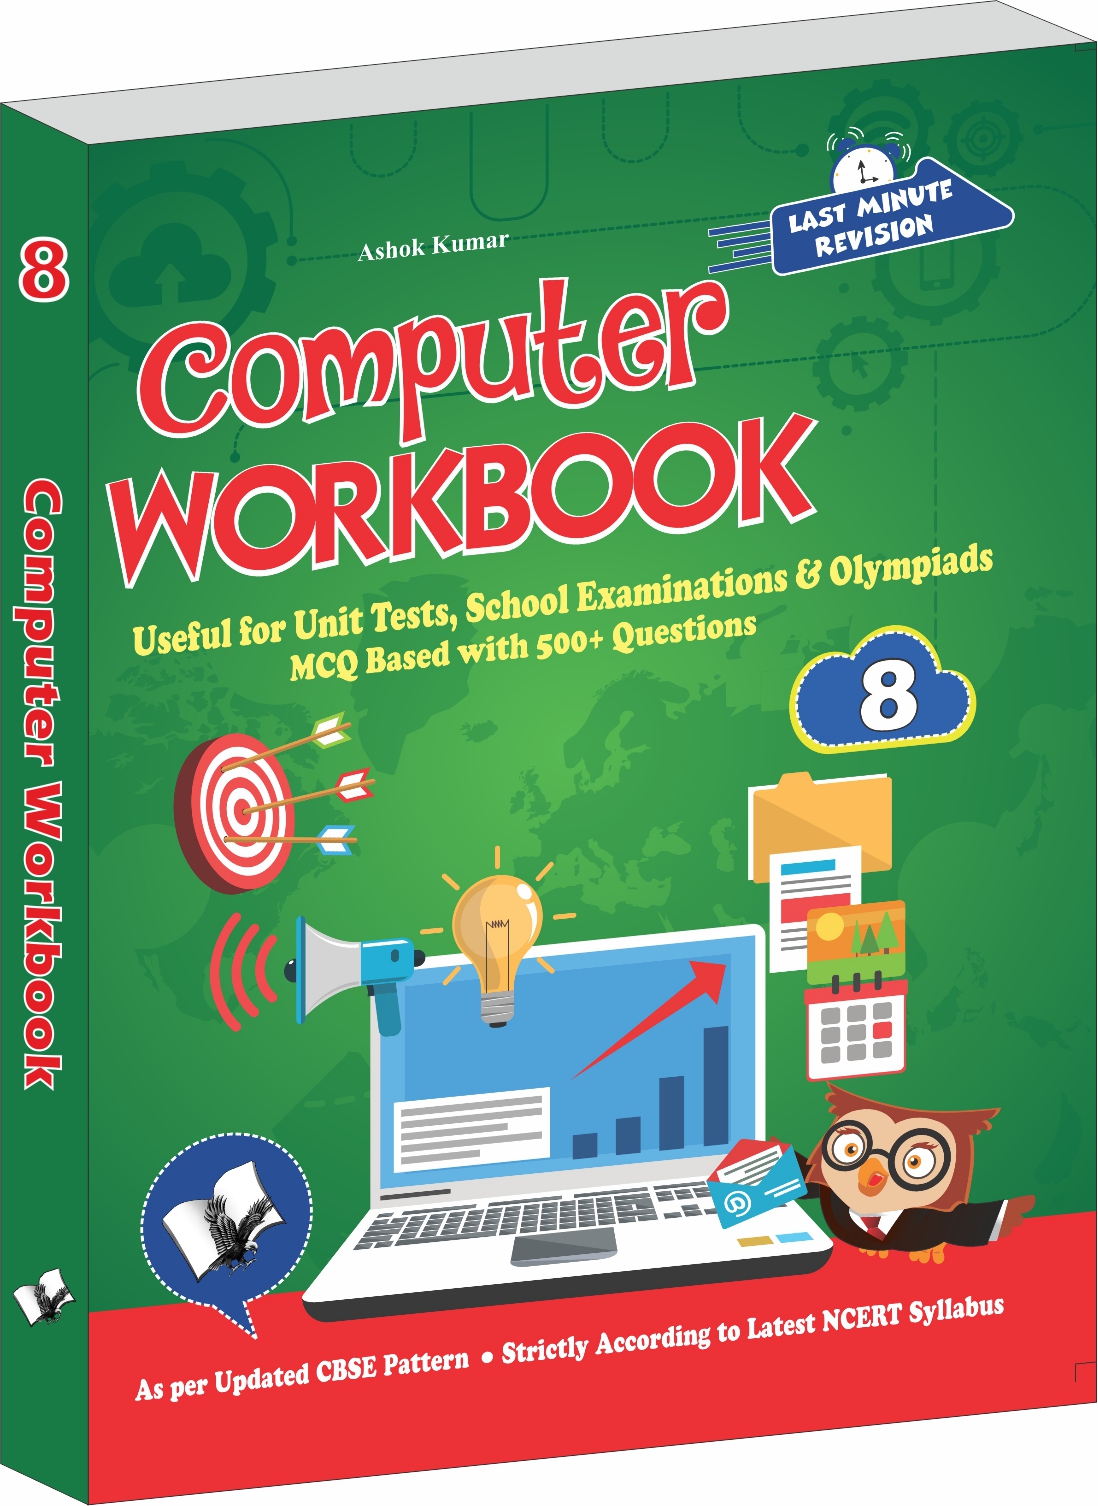 Computer Workbook Class 8-Useful for Unit Tests, School Examinations & Olympiads